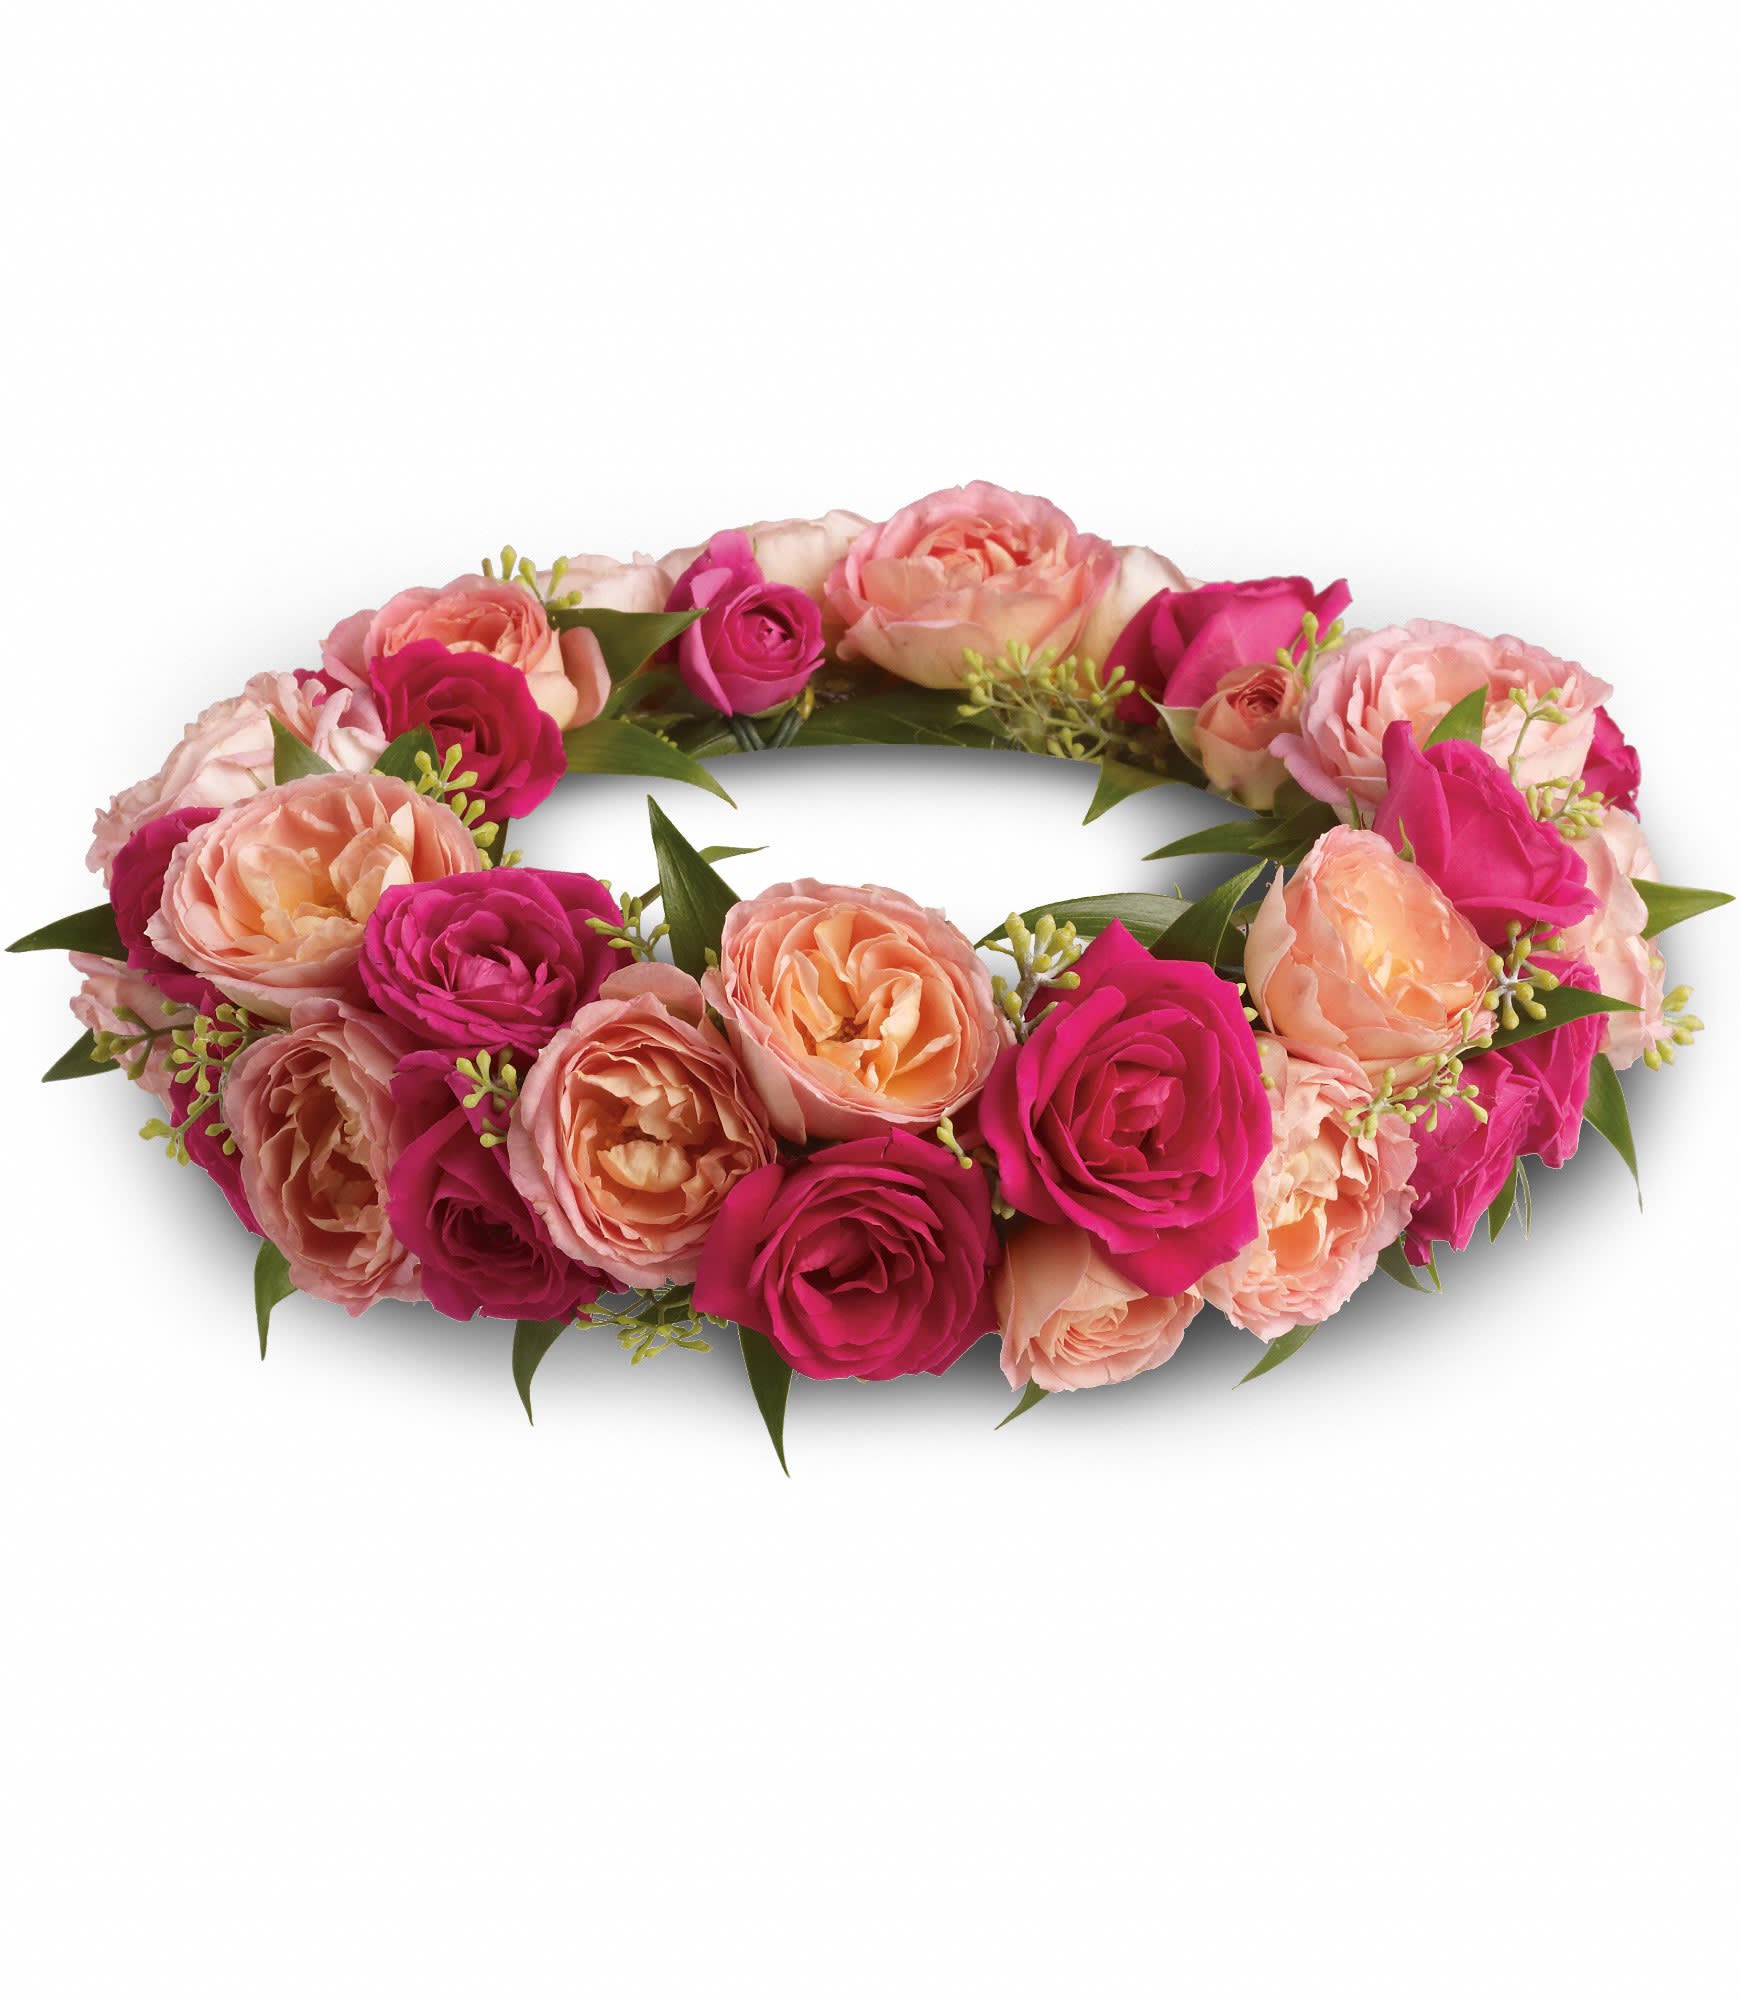 Queen's Garden Crown - She'll feel like royalty in this gorgeous crown of pink roses.    A crown of pink and hot pink roses with accents of seeded eucalyptus and Italian ruscus.    Approximately 25&quot; W x 3 1/2&quot; H    Orientation: N/A    As Shown : T193-5A